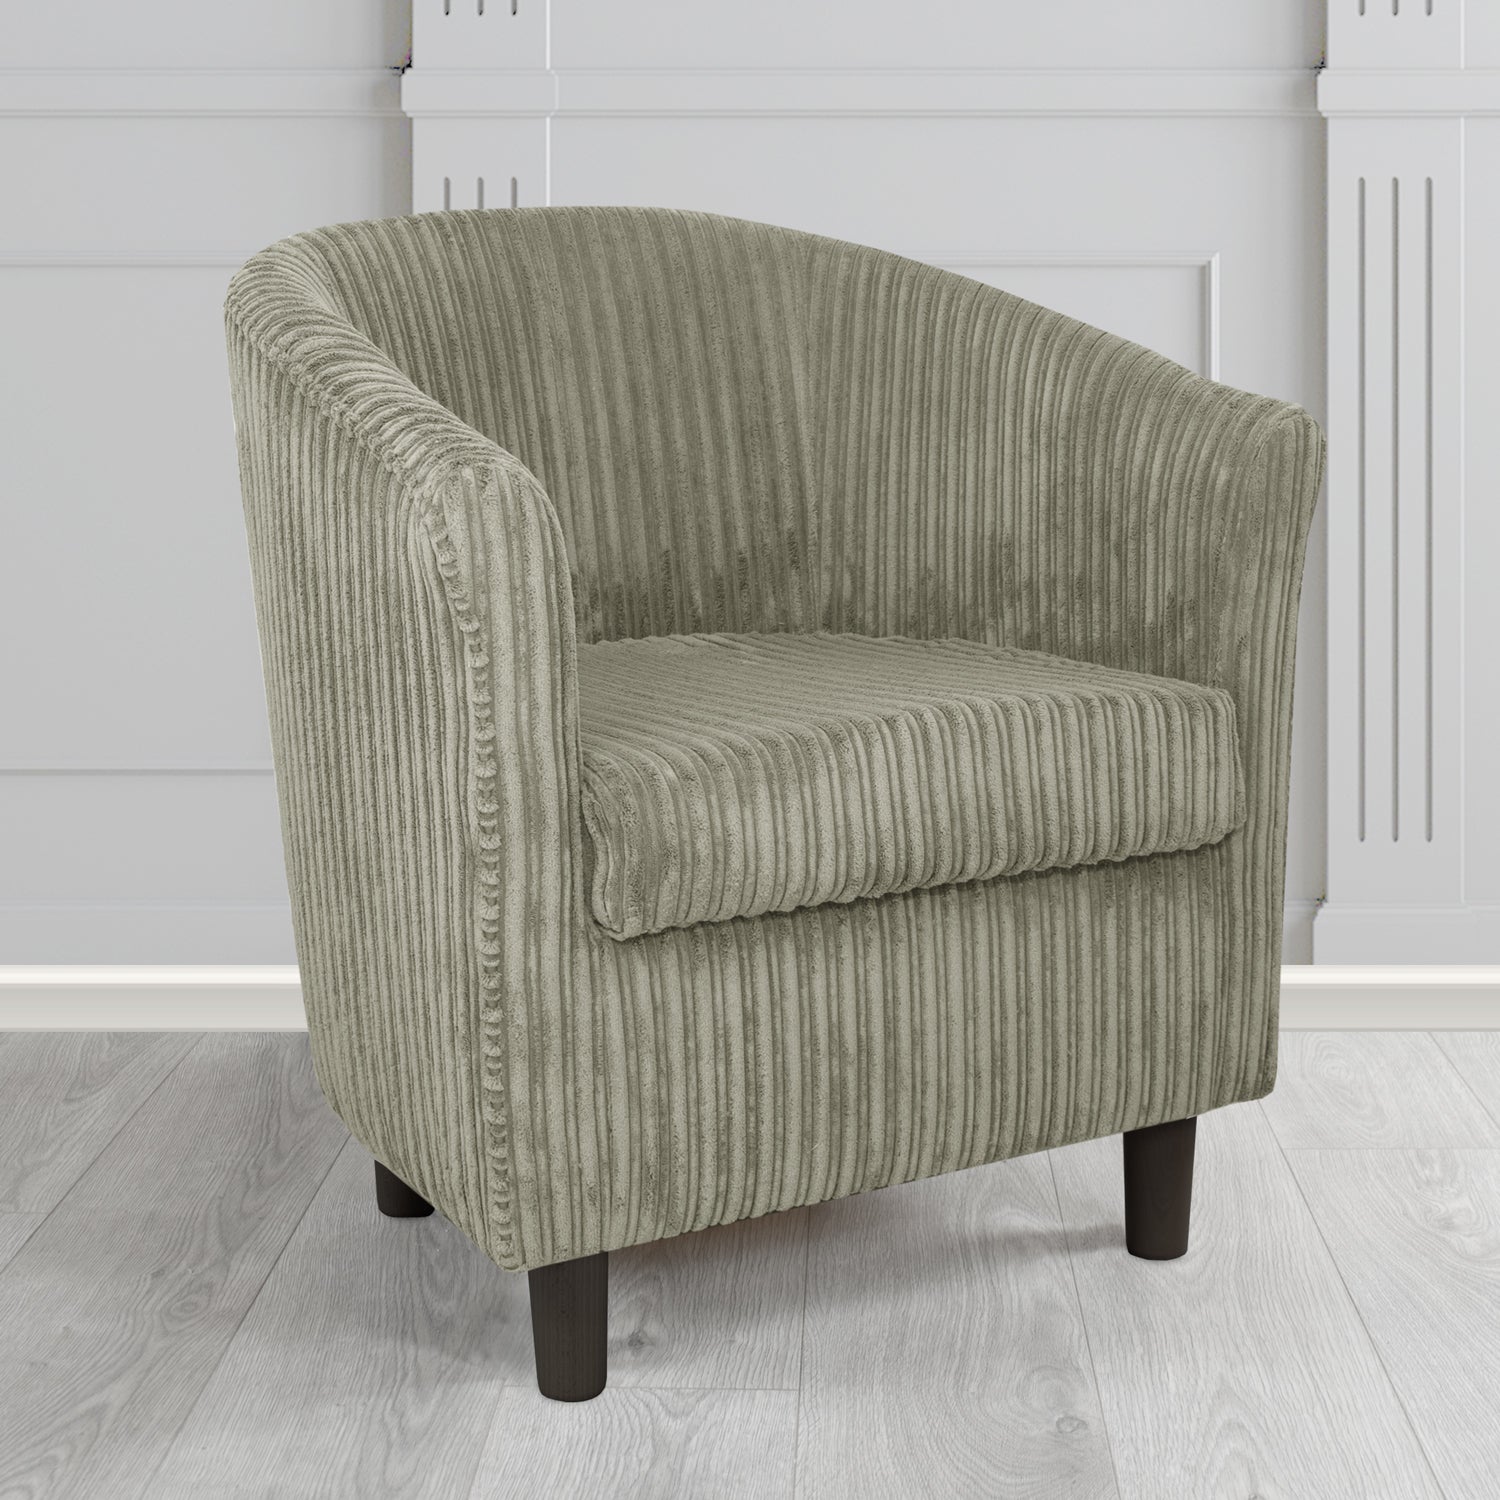 Tuscany in Conway Seal Plain Textured Fabric Tub Chair (6581733163050)